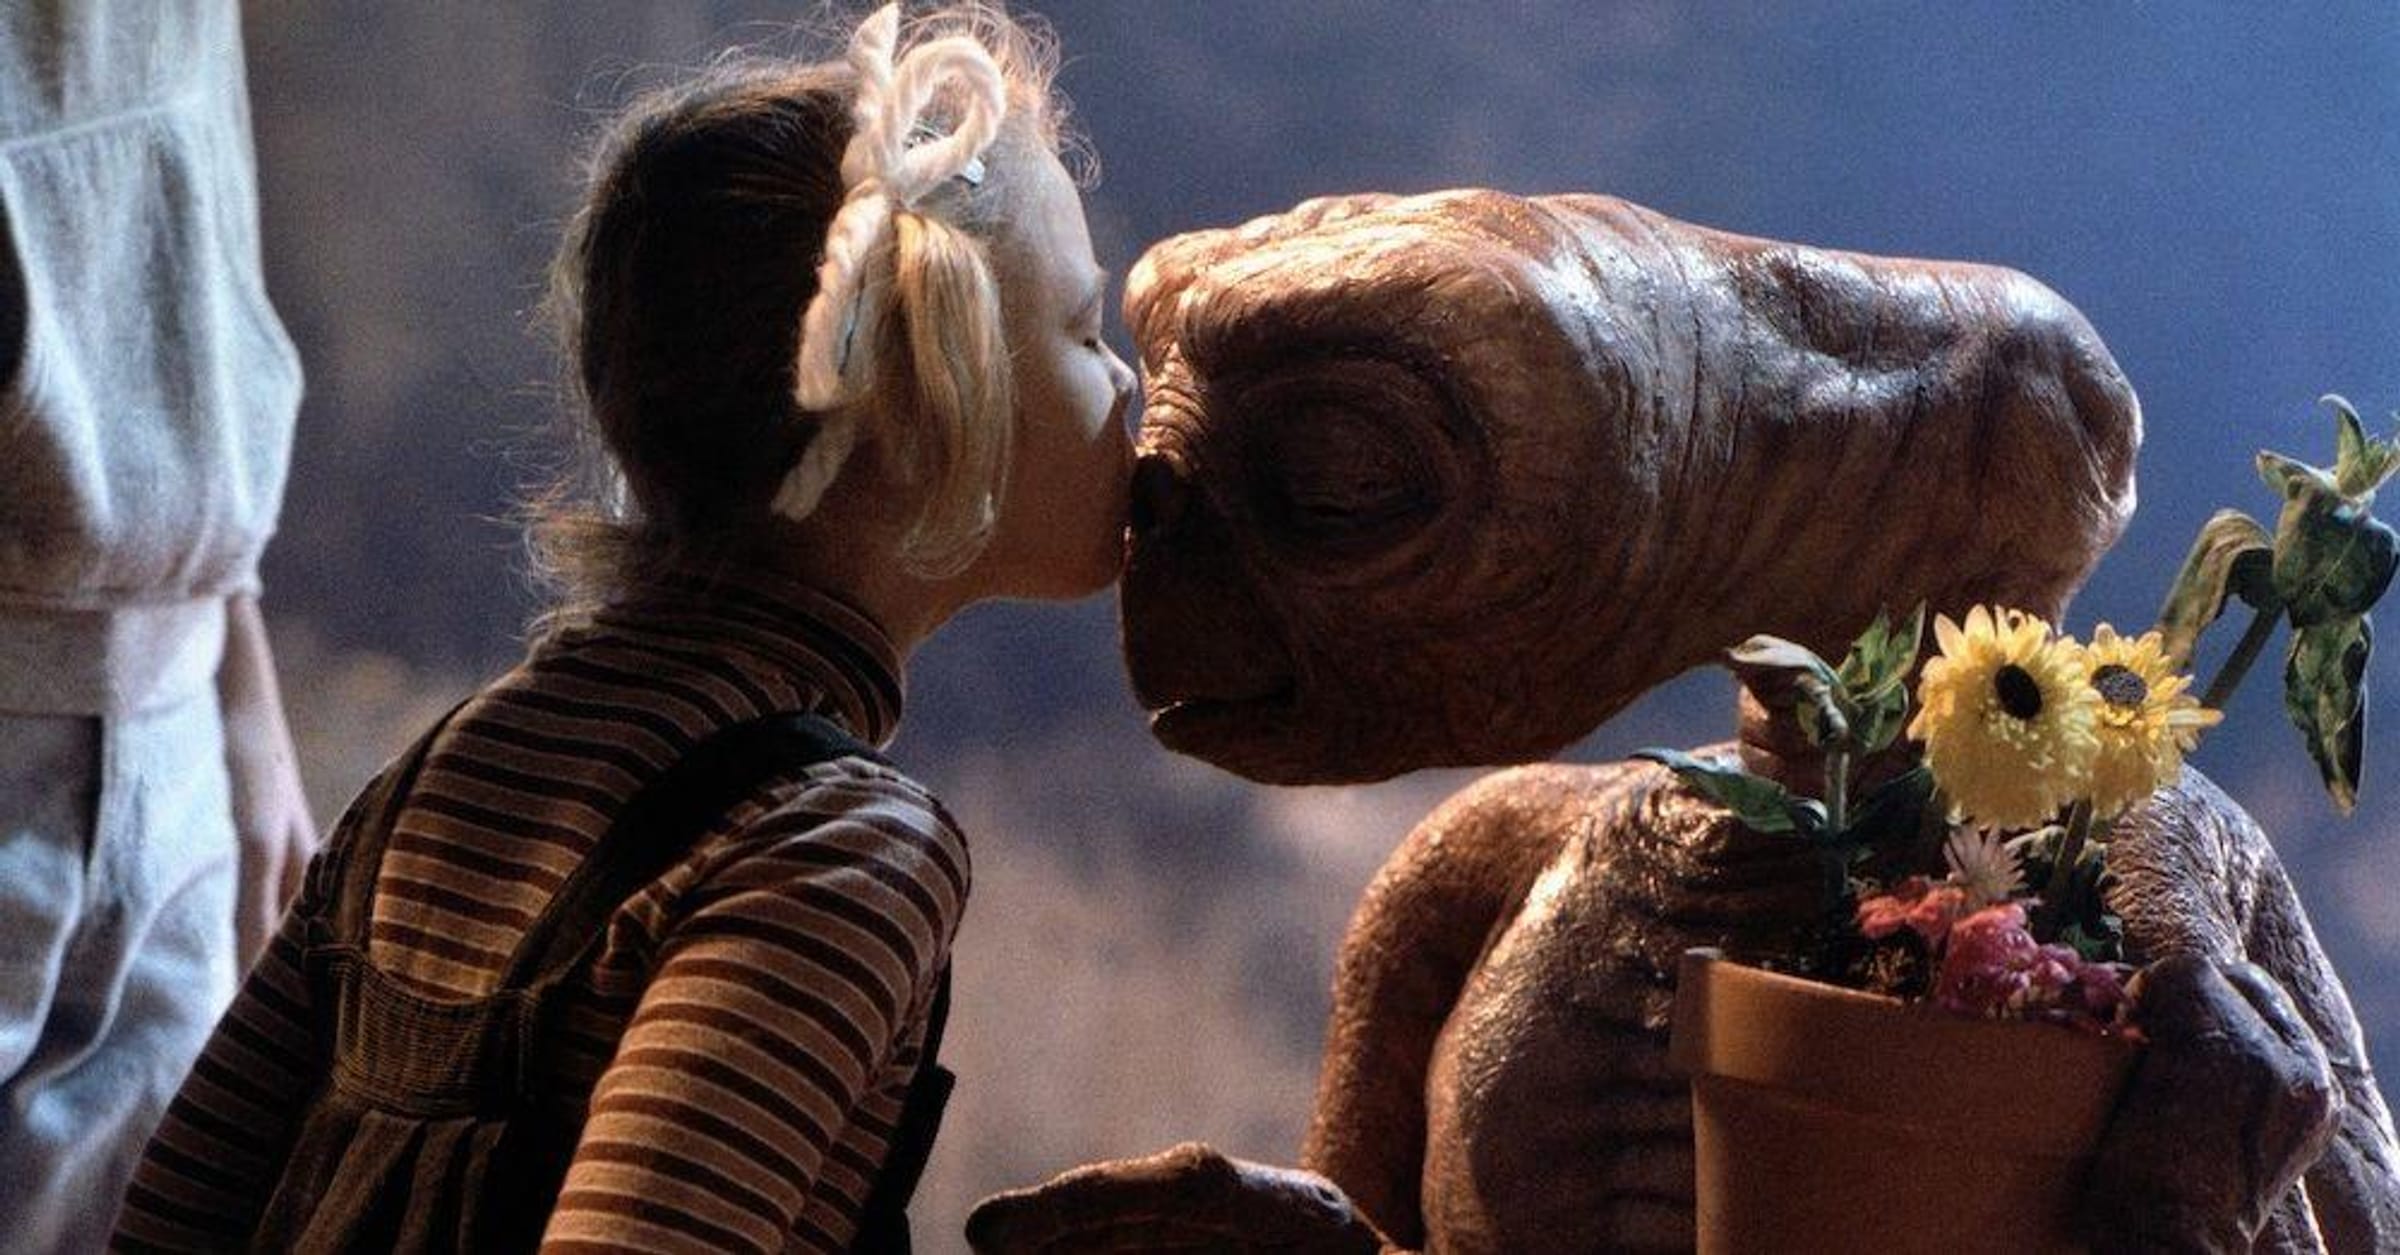 20 Crazy Details Behind The Making Of E.T. The Extra-Terrestrial